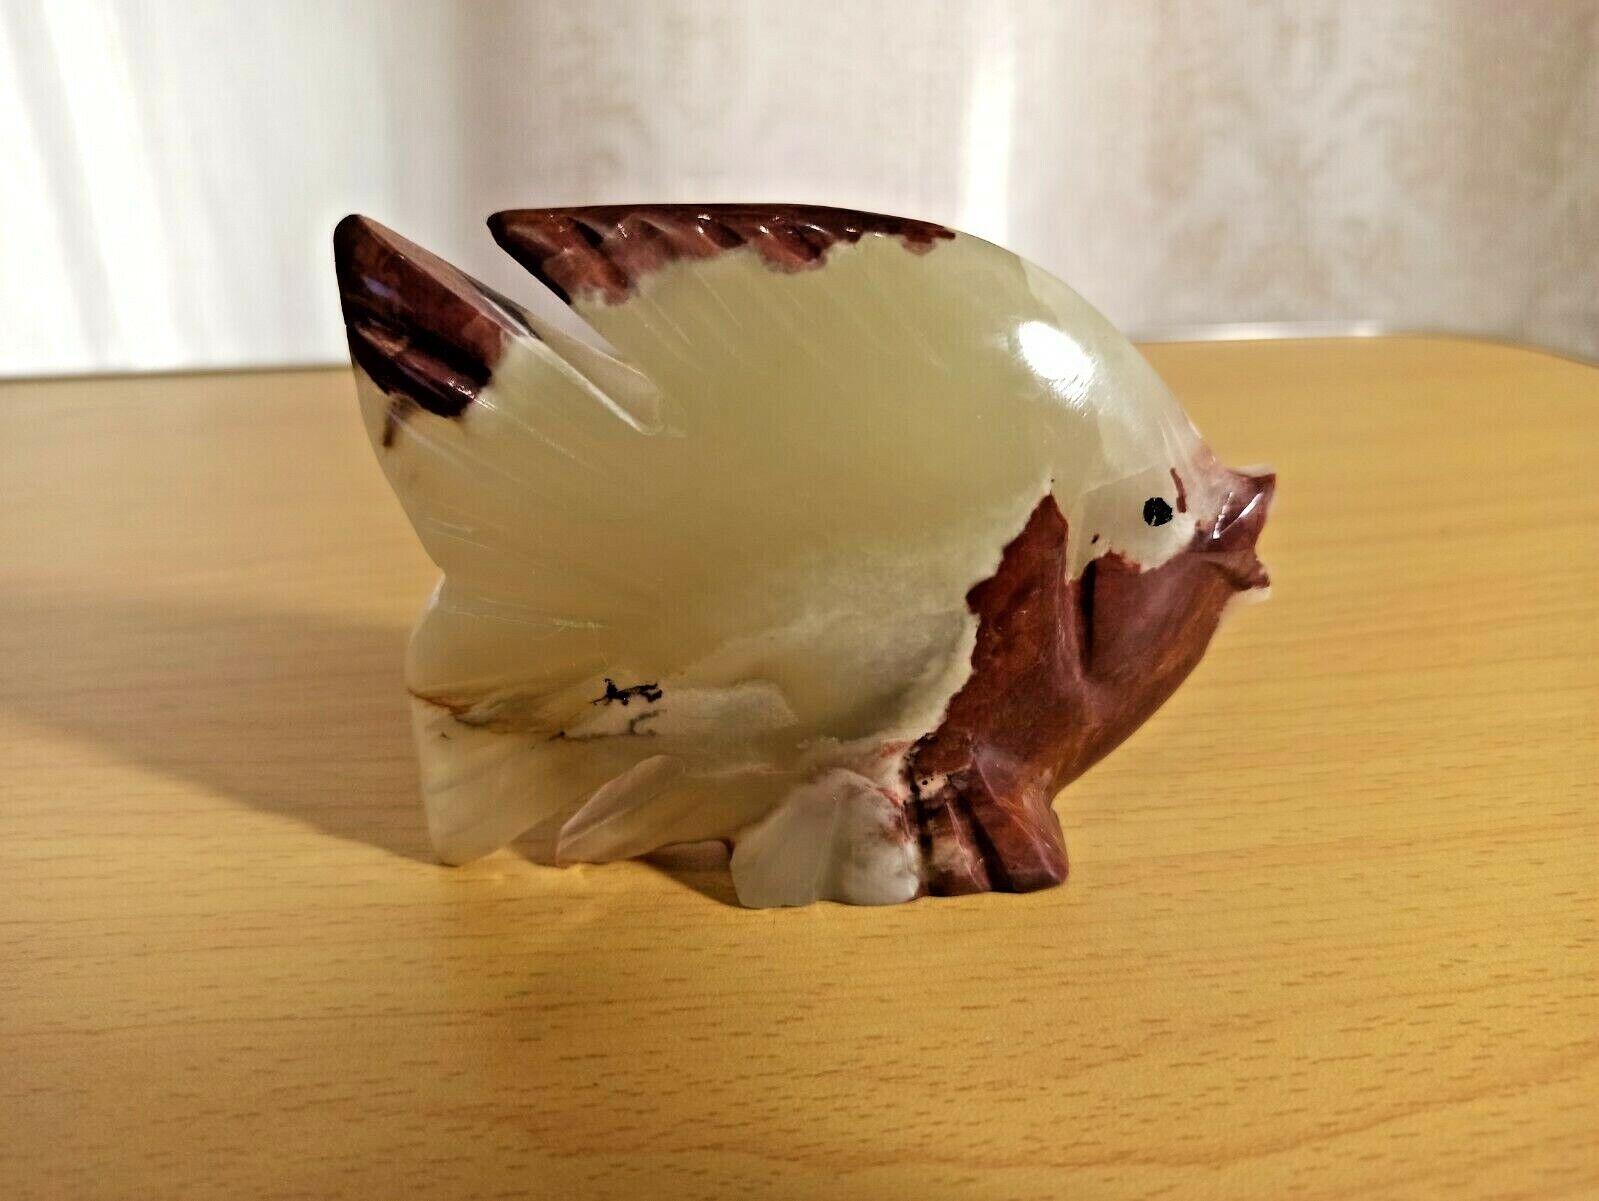 Vintage Figurine Of A Fish From Onyx.